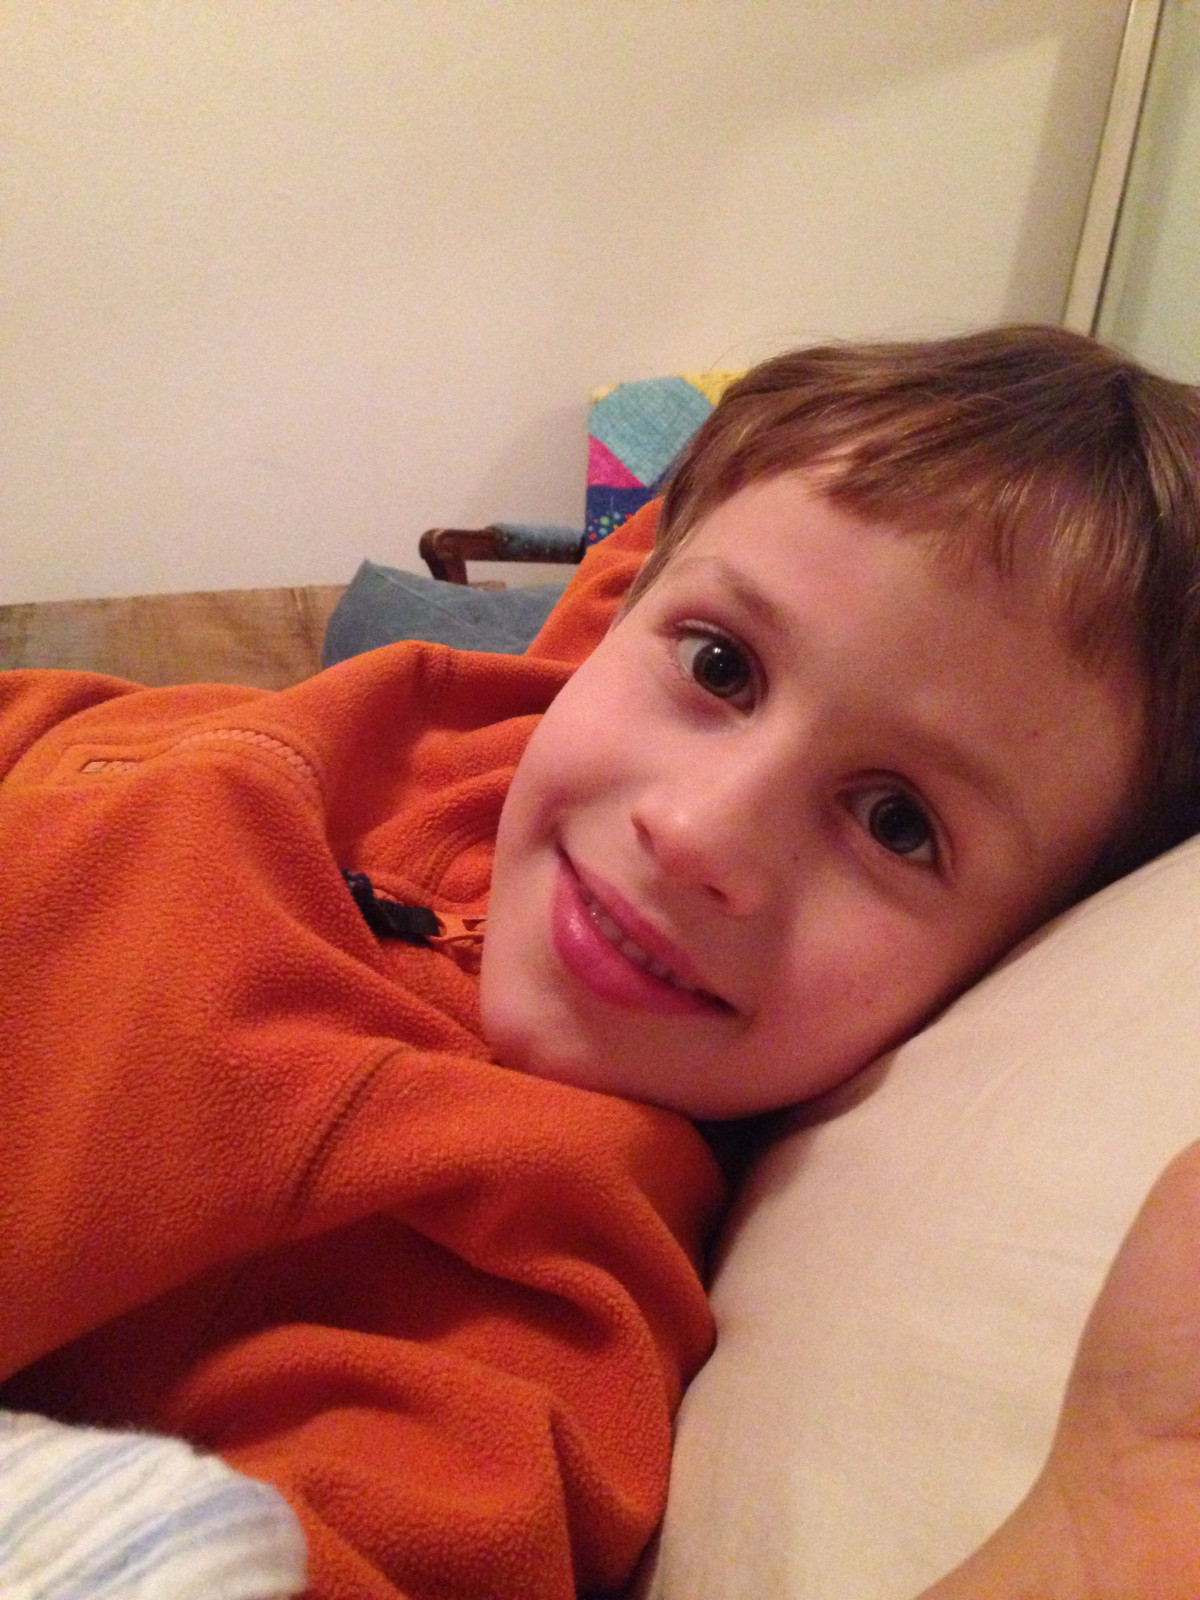 A boy laying on the bed, looking at the camera